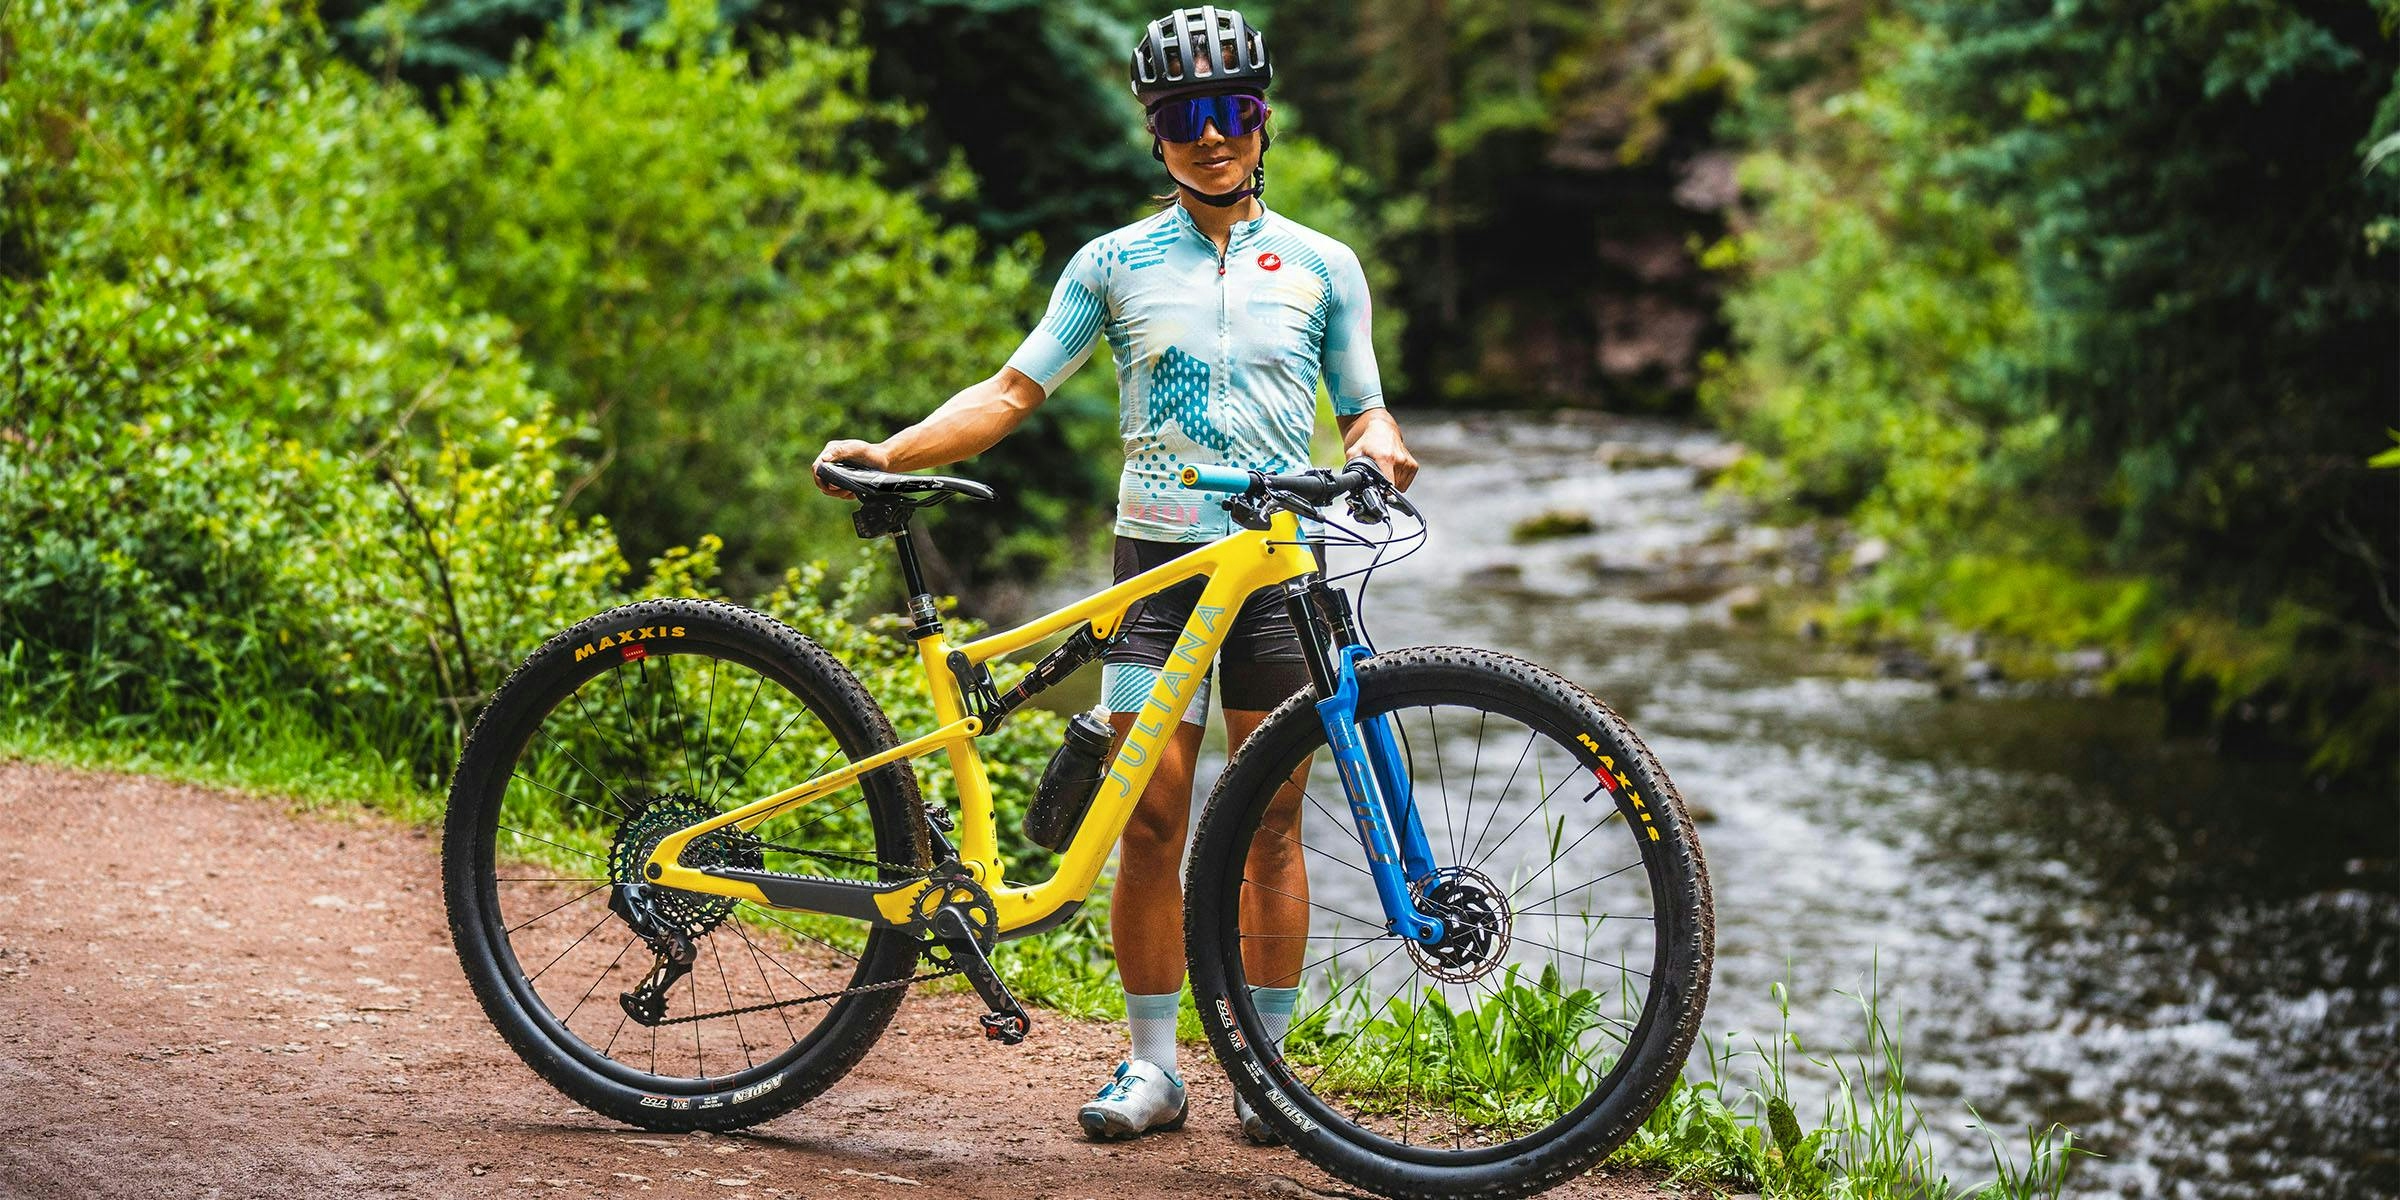 Juliana Bicycles Pro XC Rider - Evelyn Dong standing with her Wilder X01 AXS RSV Full Suspension Mountain bike